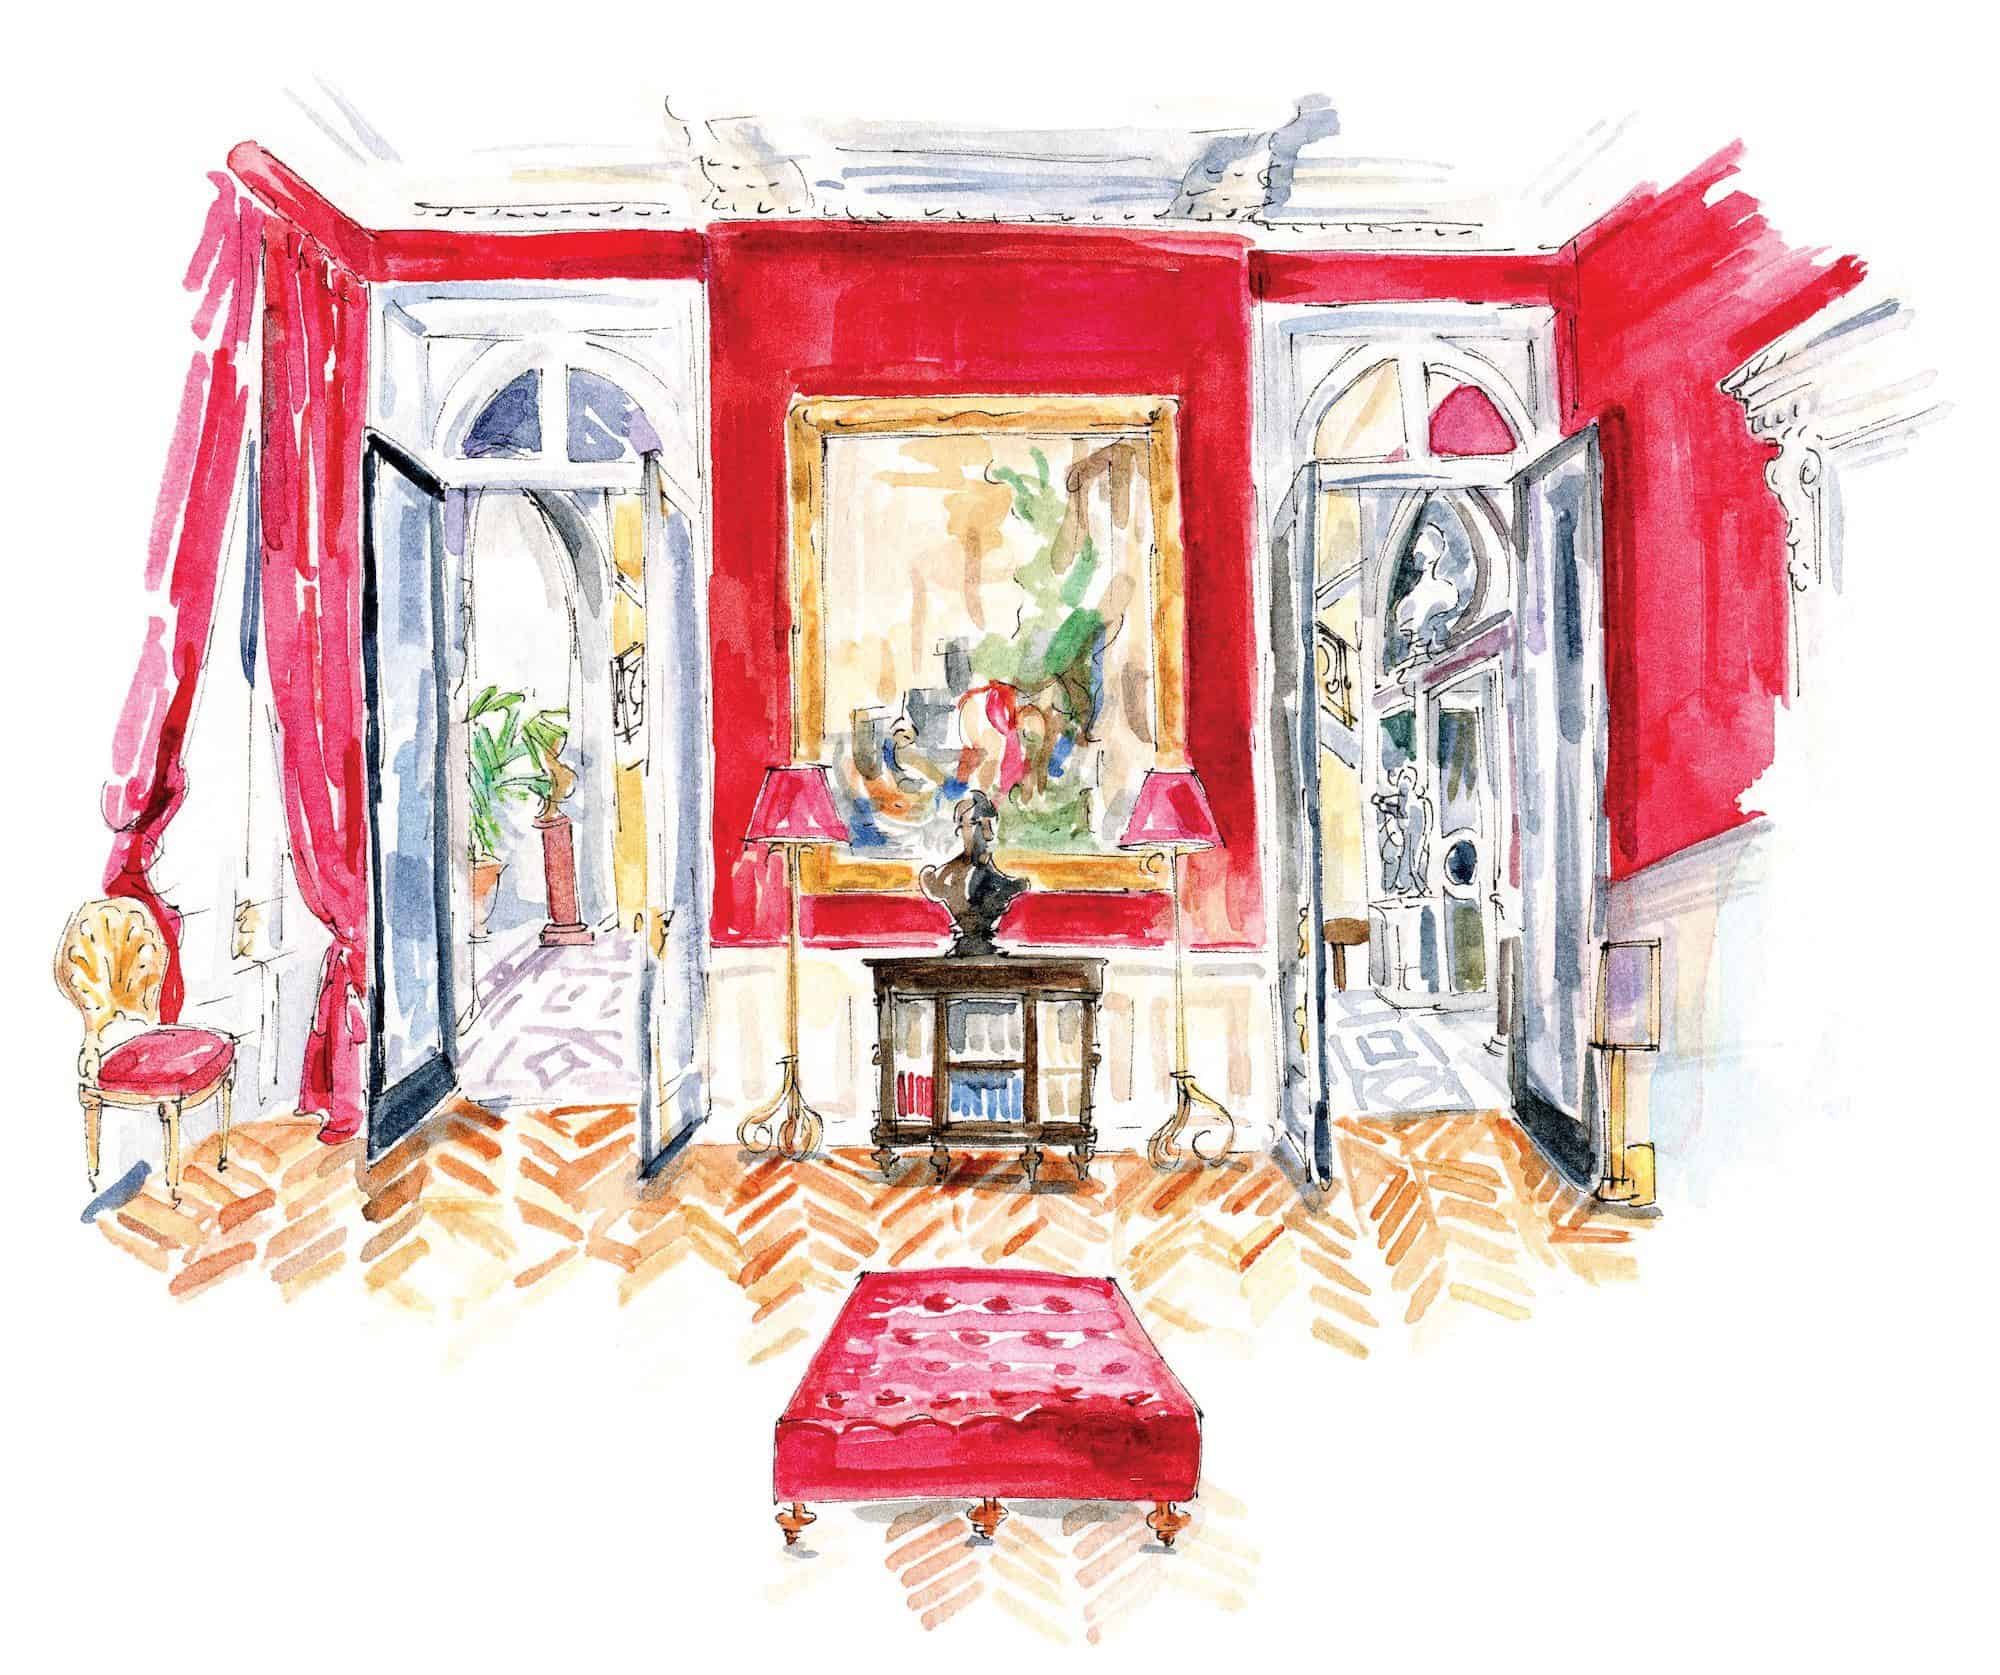 A sketch of a Paris museum from illustrator Emma Jacobs' book Little(r) Museums of Paris.